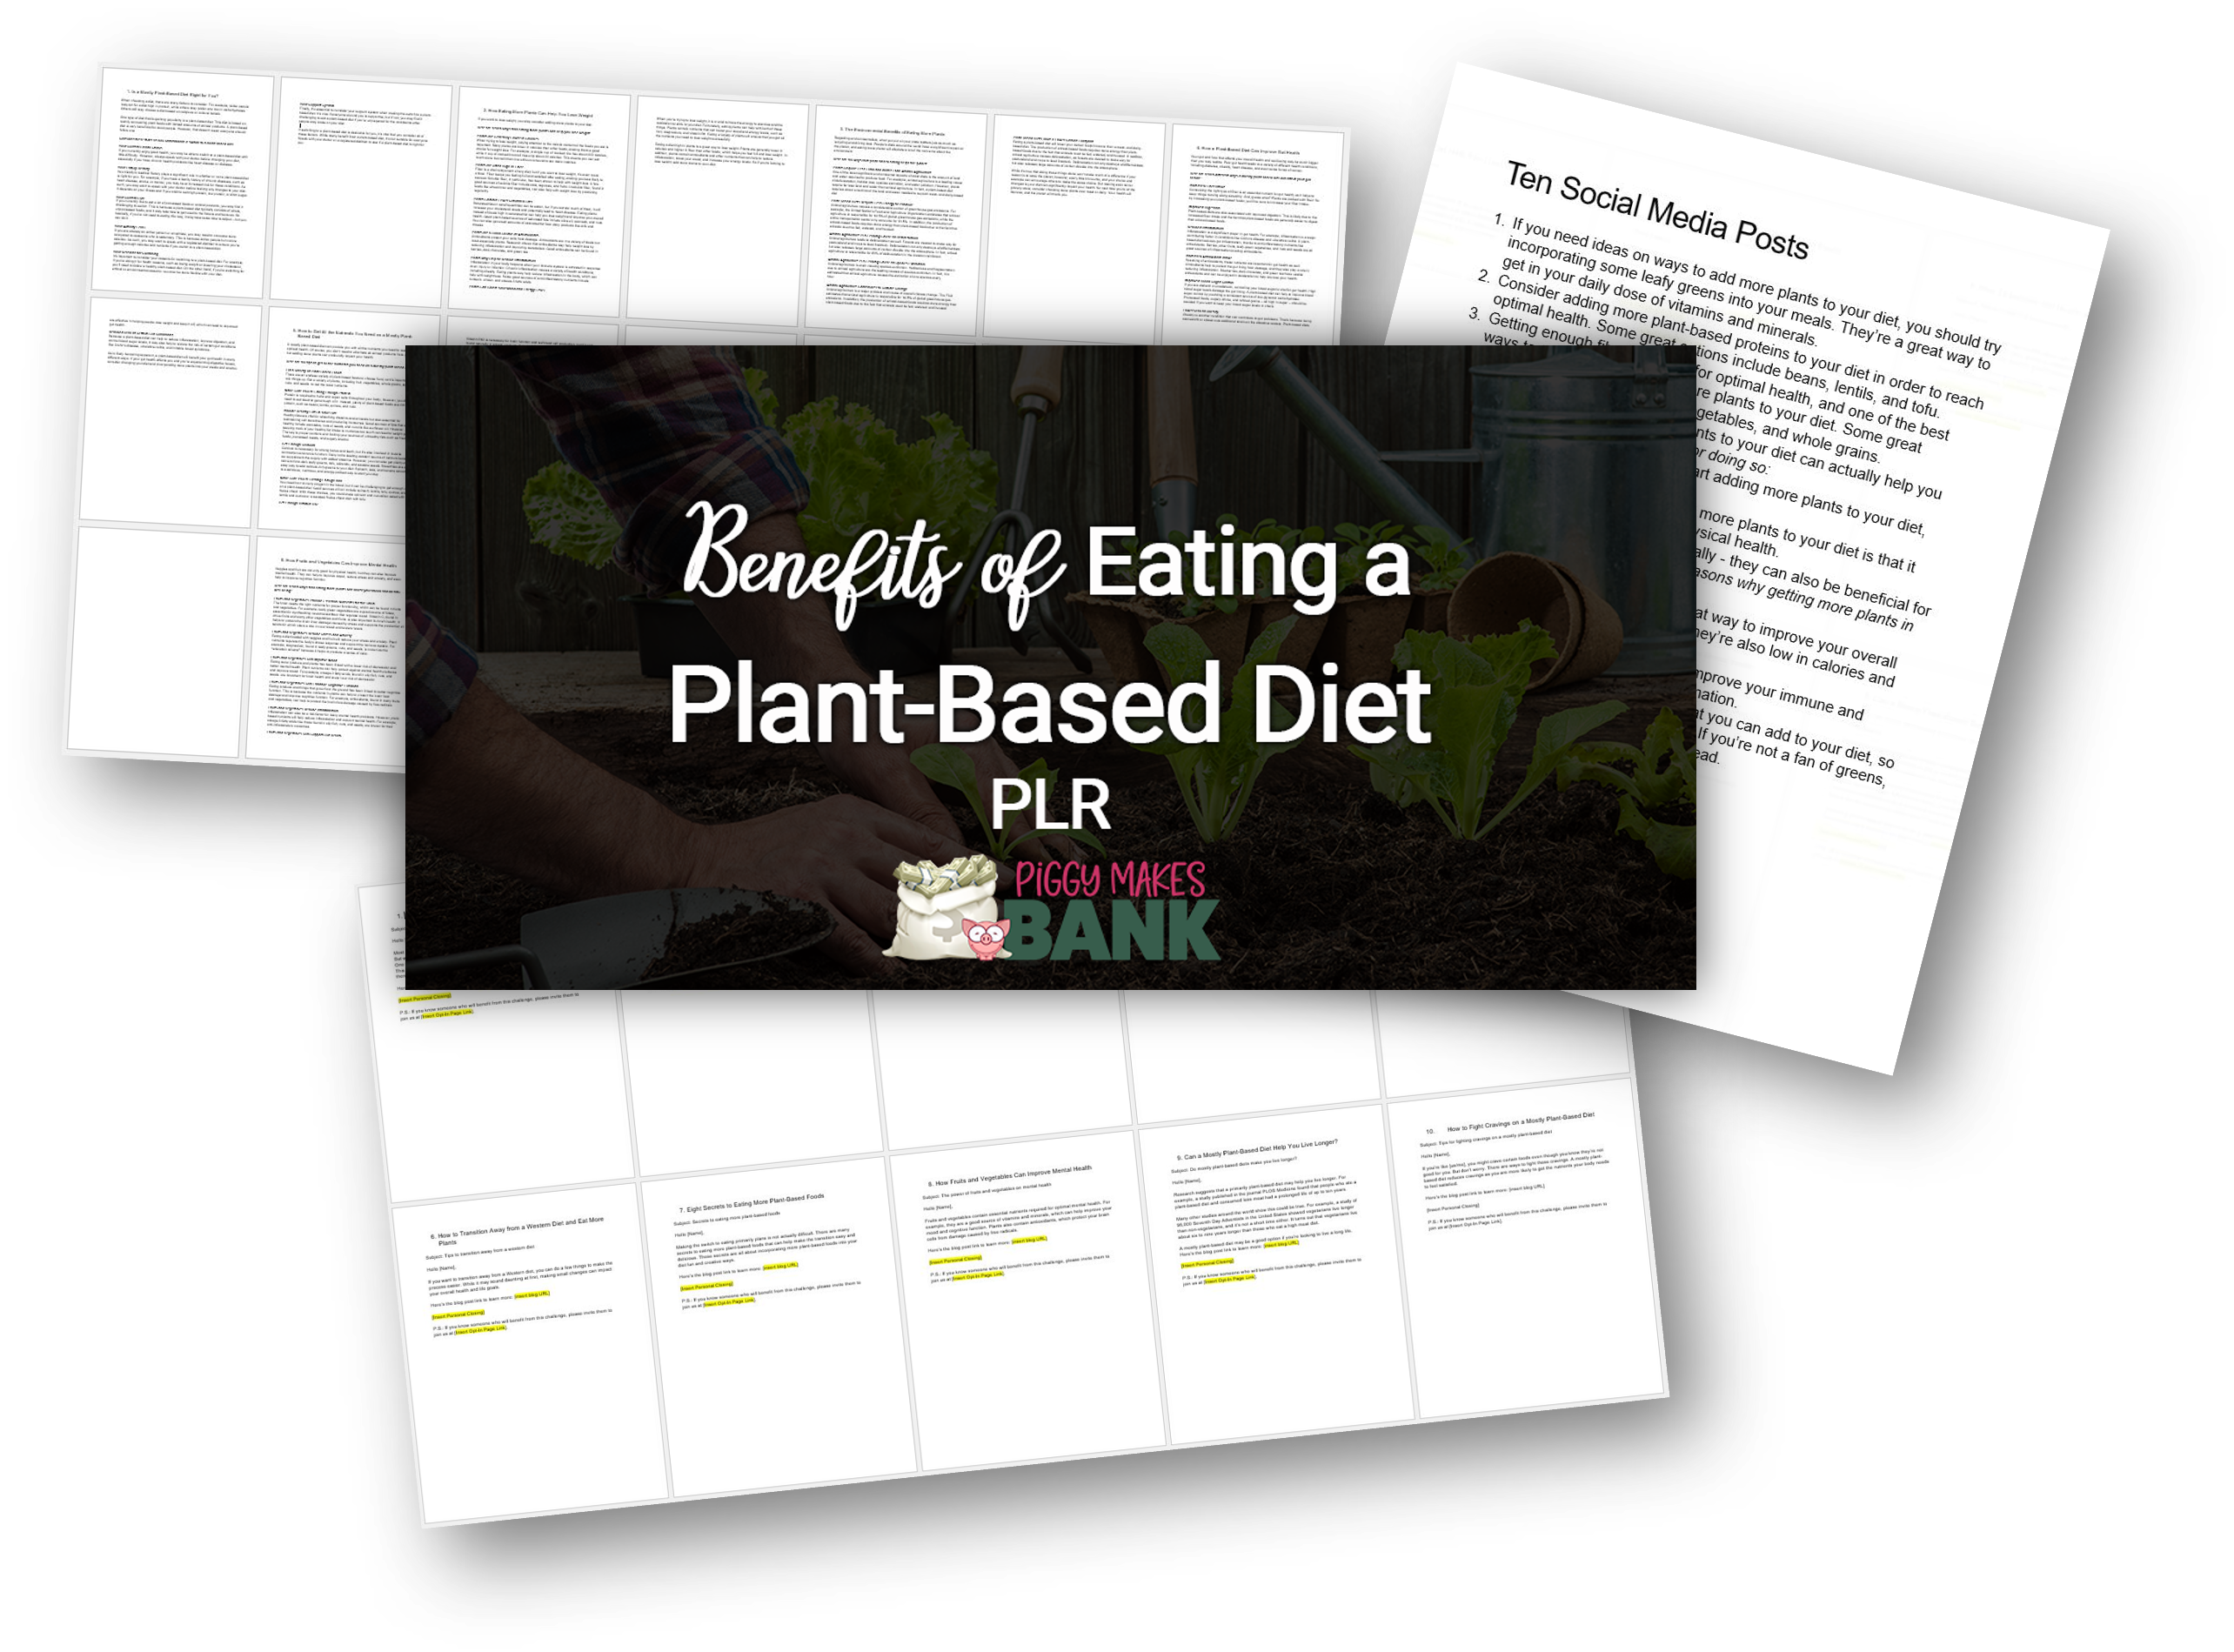 Benefits of Eating a Plant-Based Diet